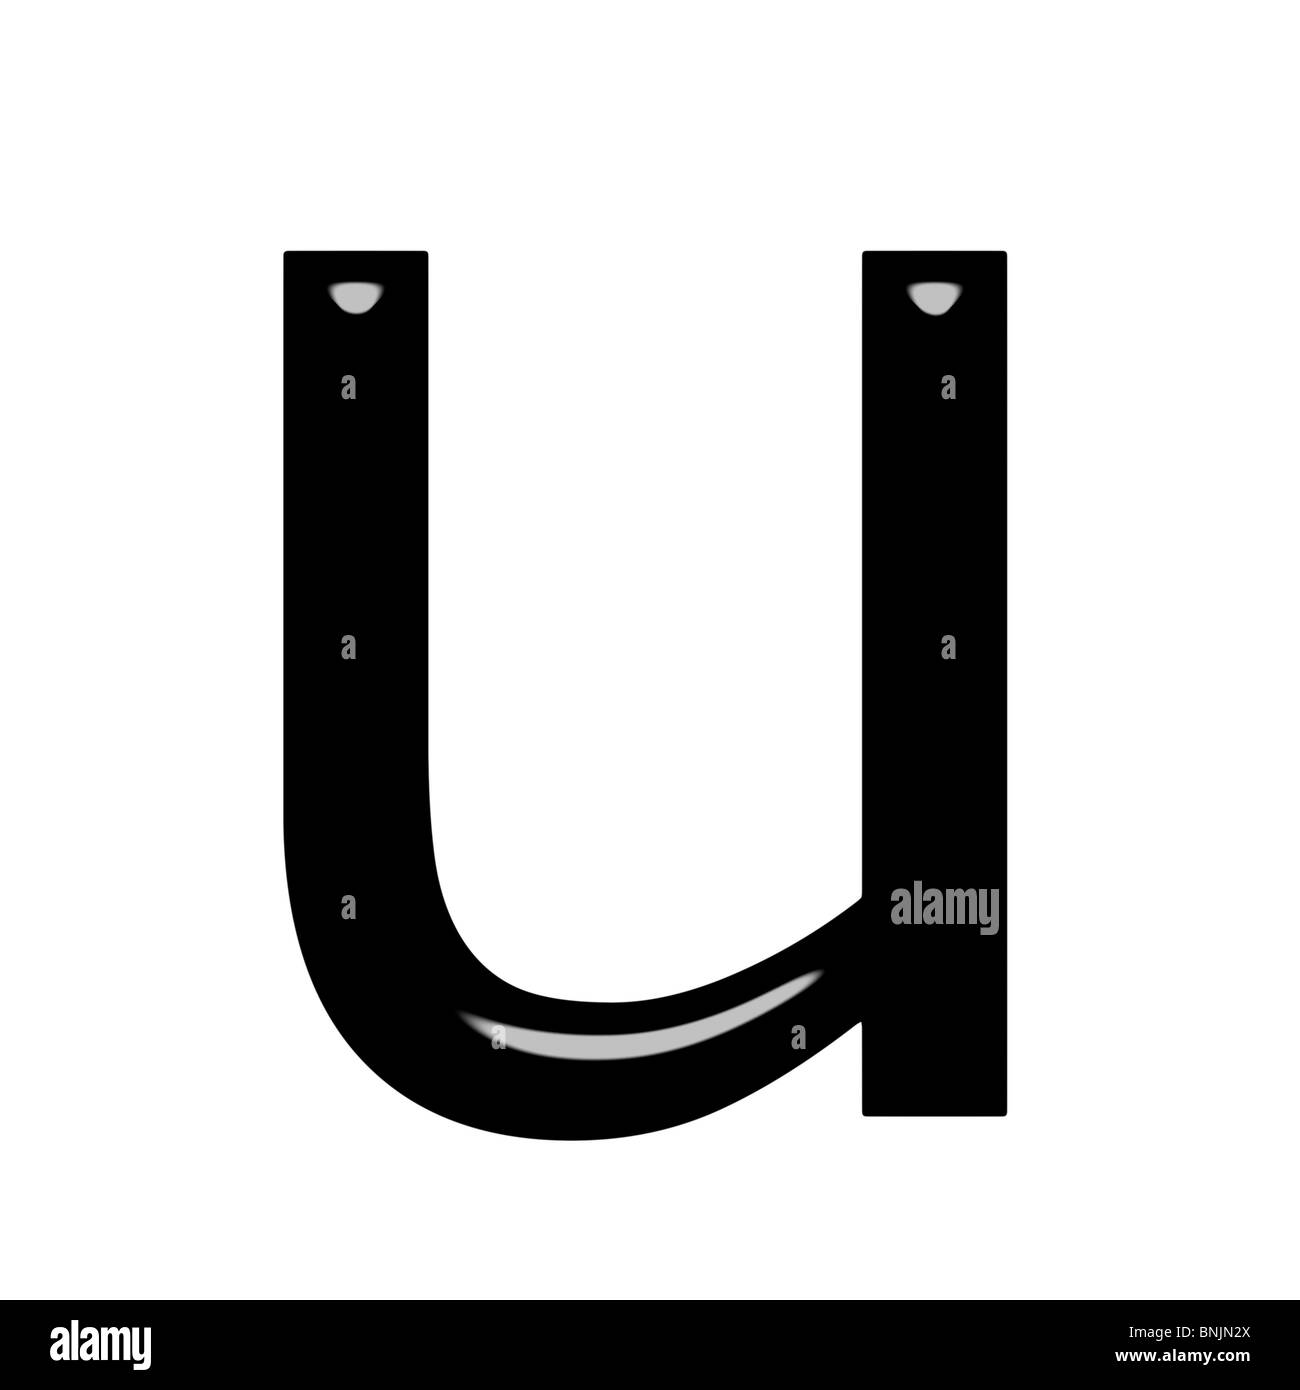 U letter Black and White Stock Photos & Images - Alamy